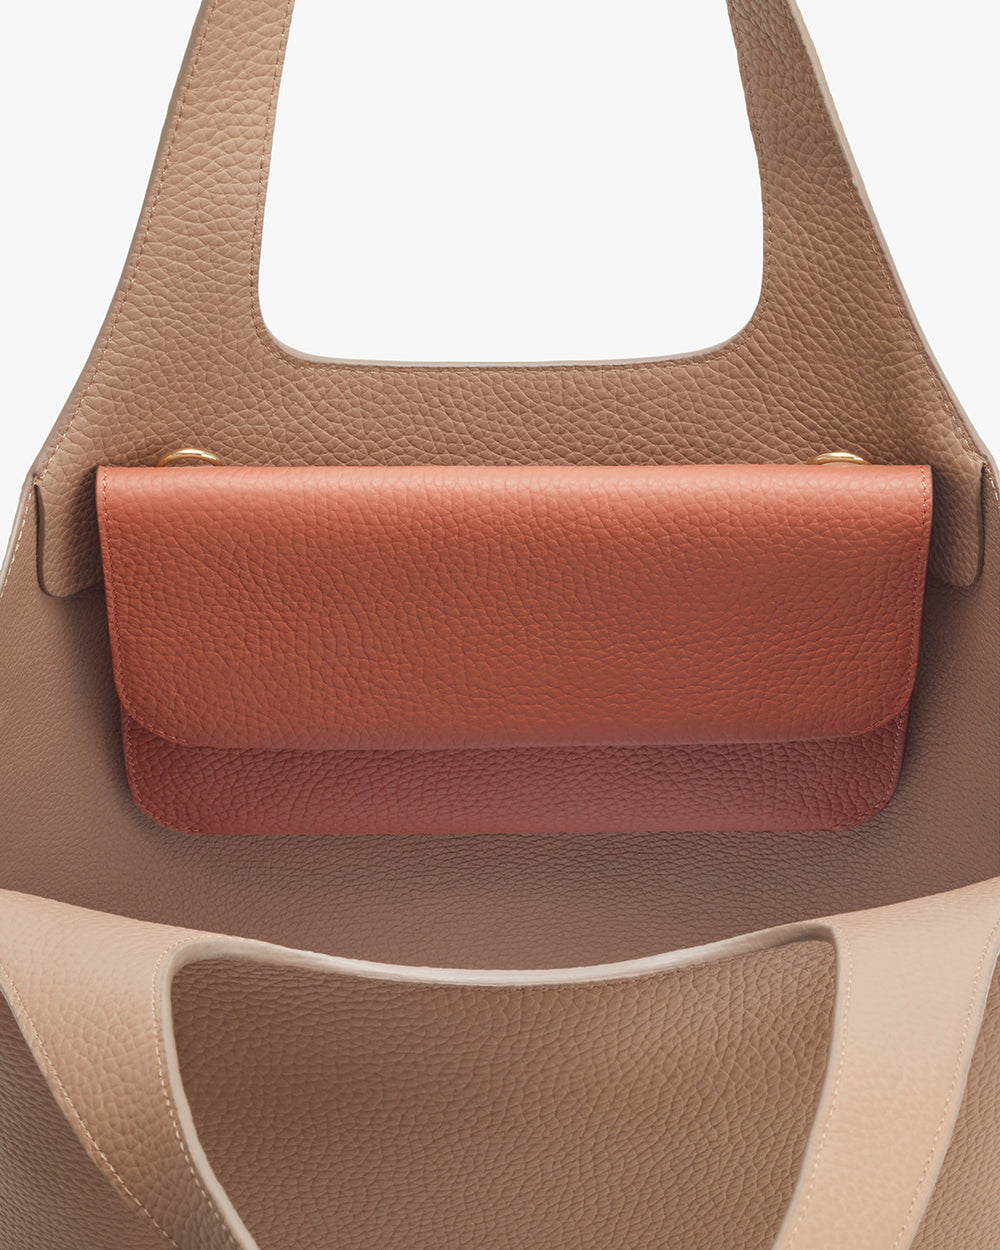 Close-up view of a handbag with a top handle.